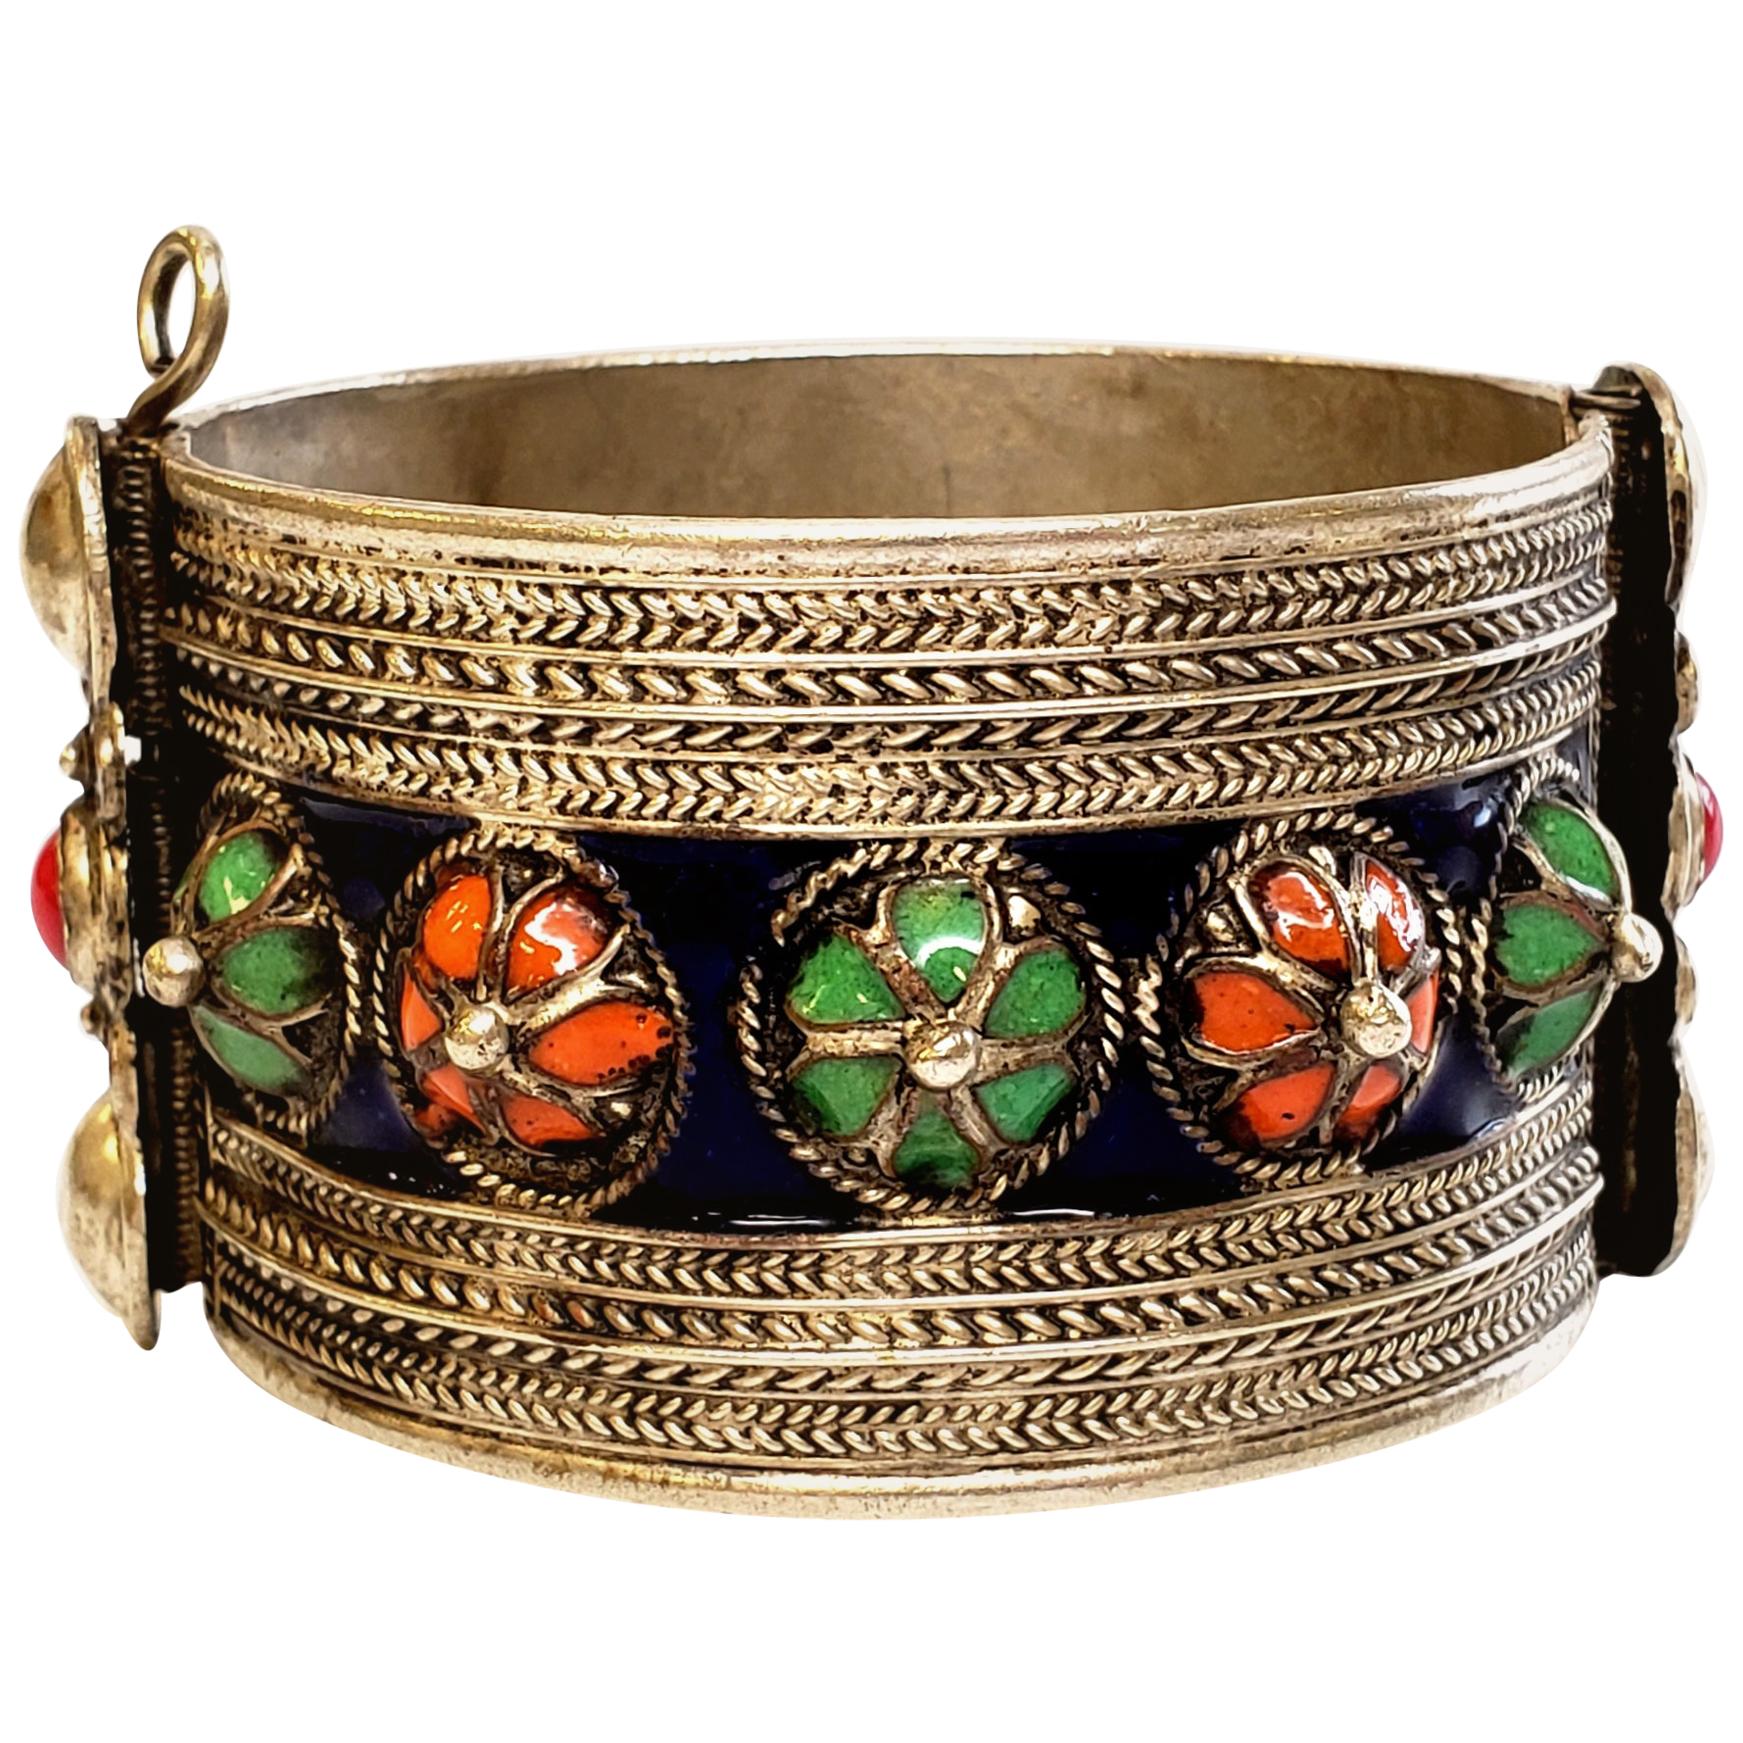 Buy Berber Bangle Kabyle Style Moroccan Made Online in India - Etsy